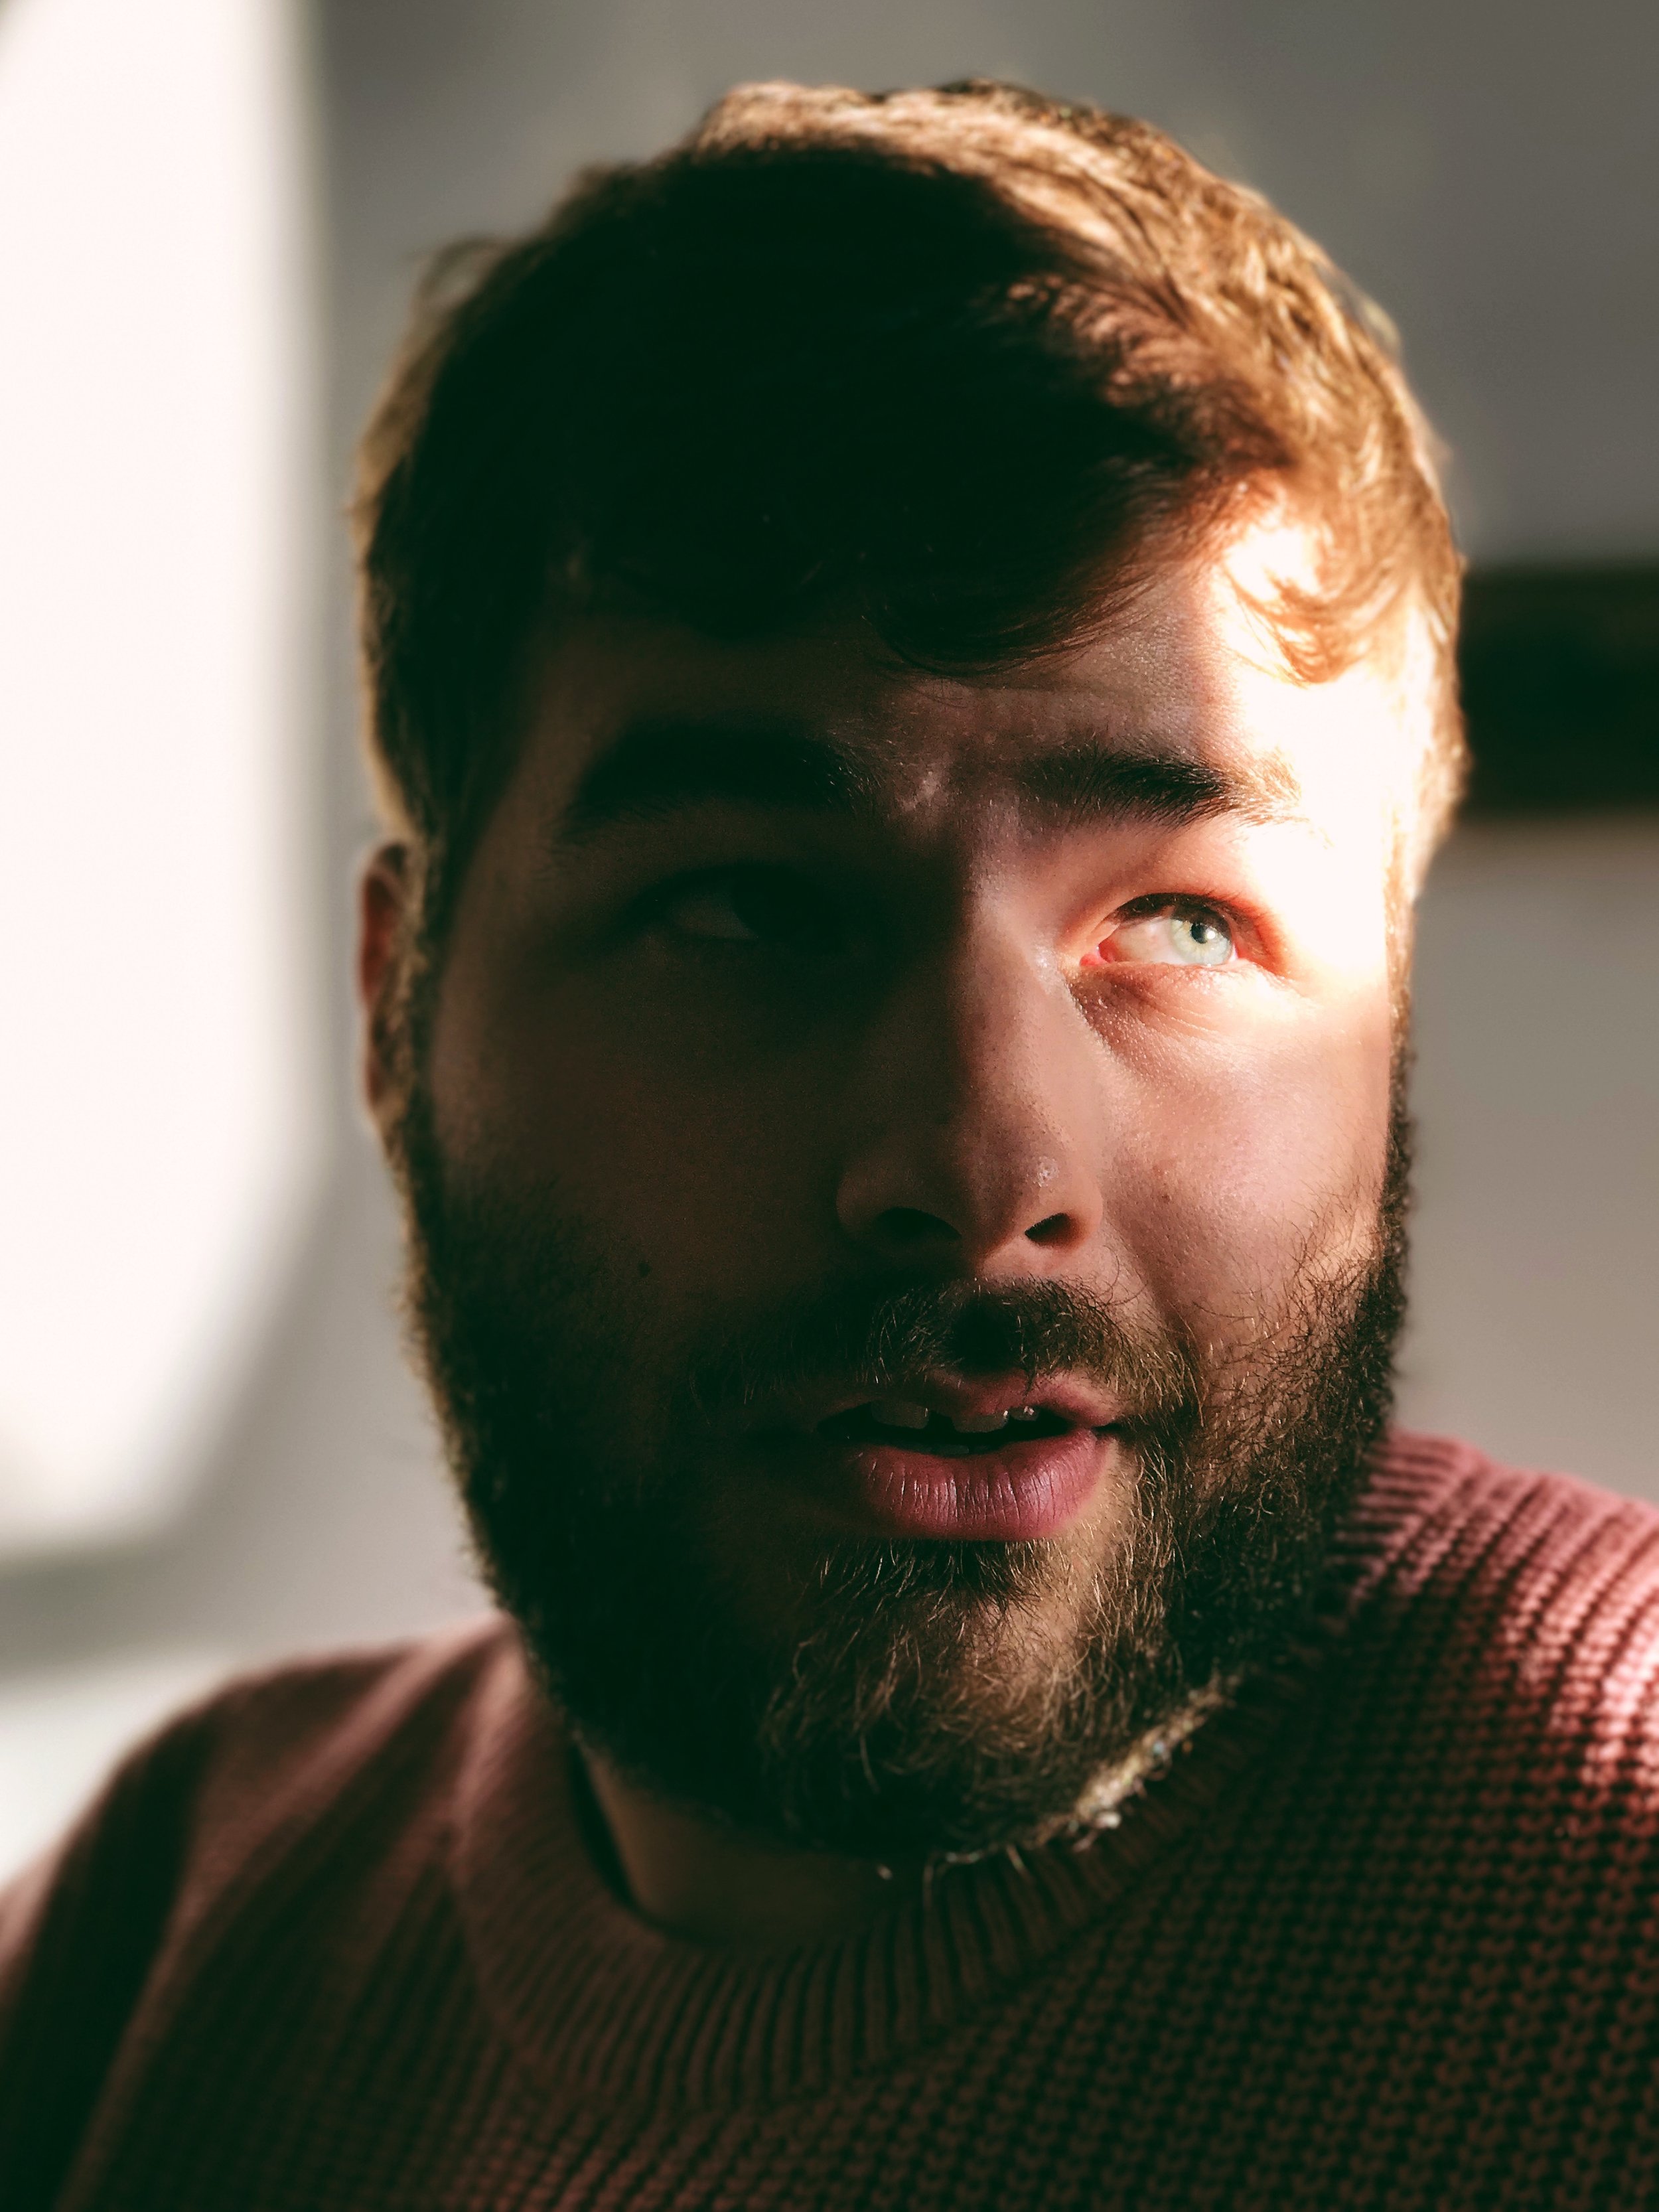 Indoor portrait of my boyfriend with available indoor light. Exposure 1/60 at f/2.8. Edited with VSCO.